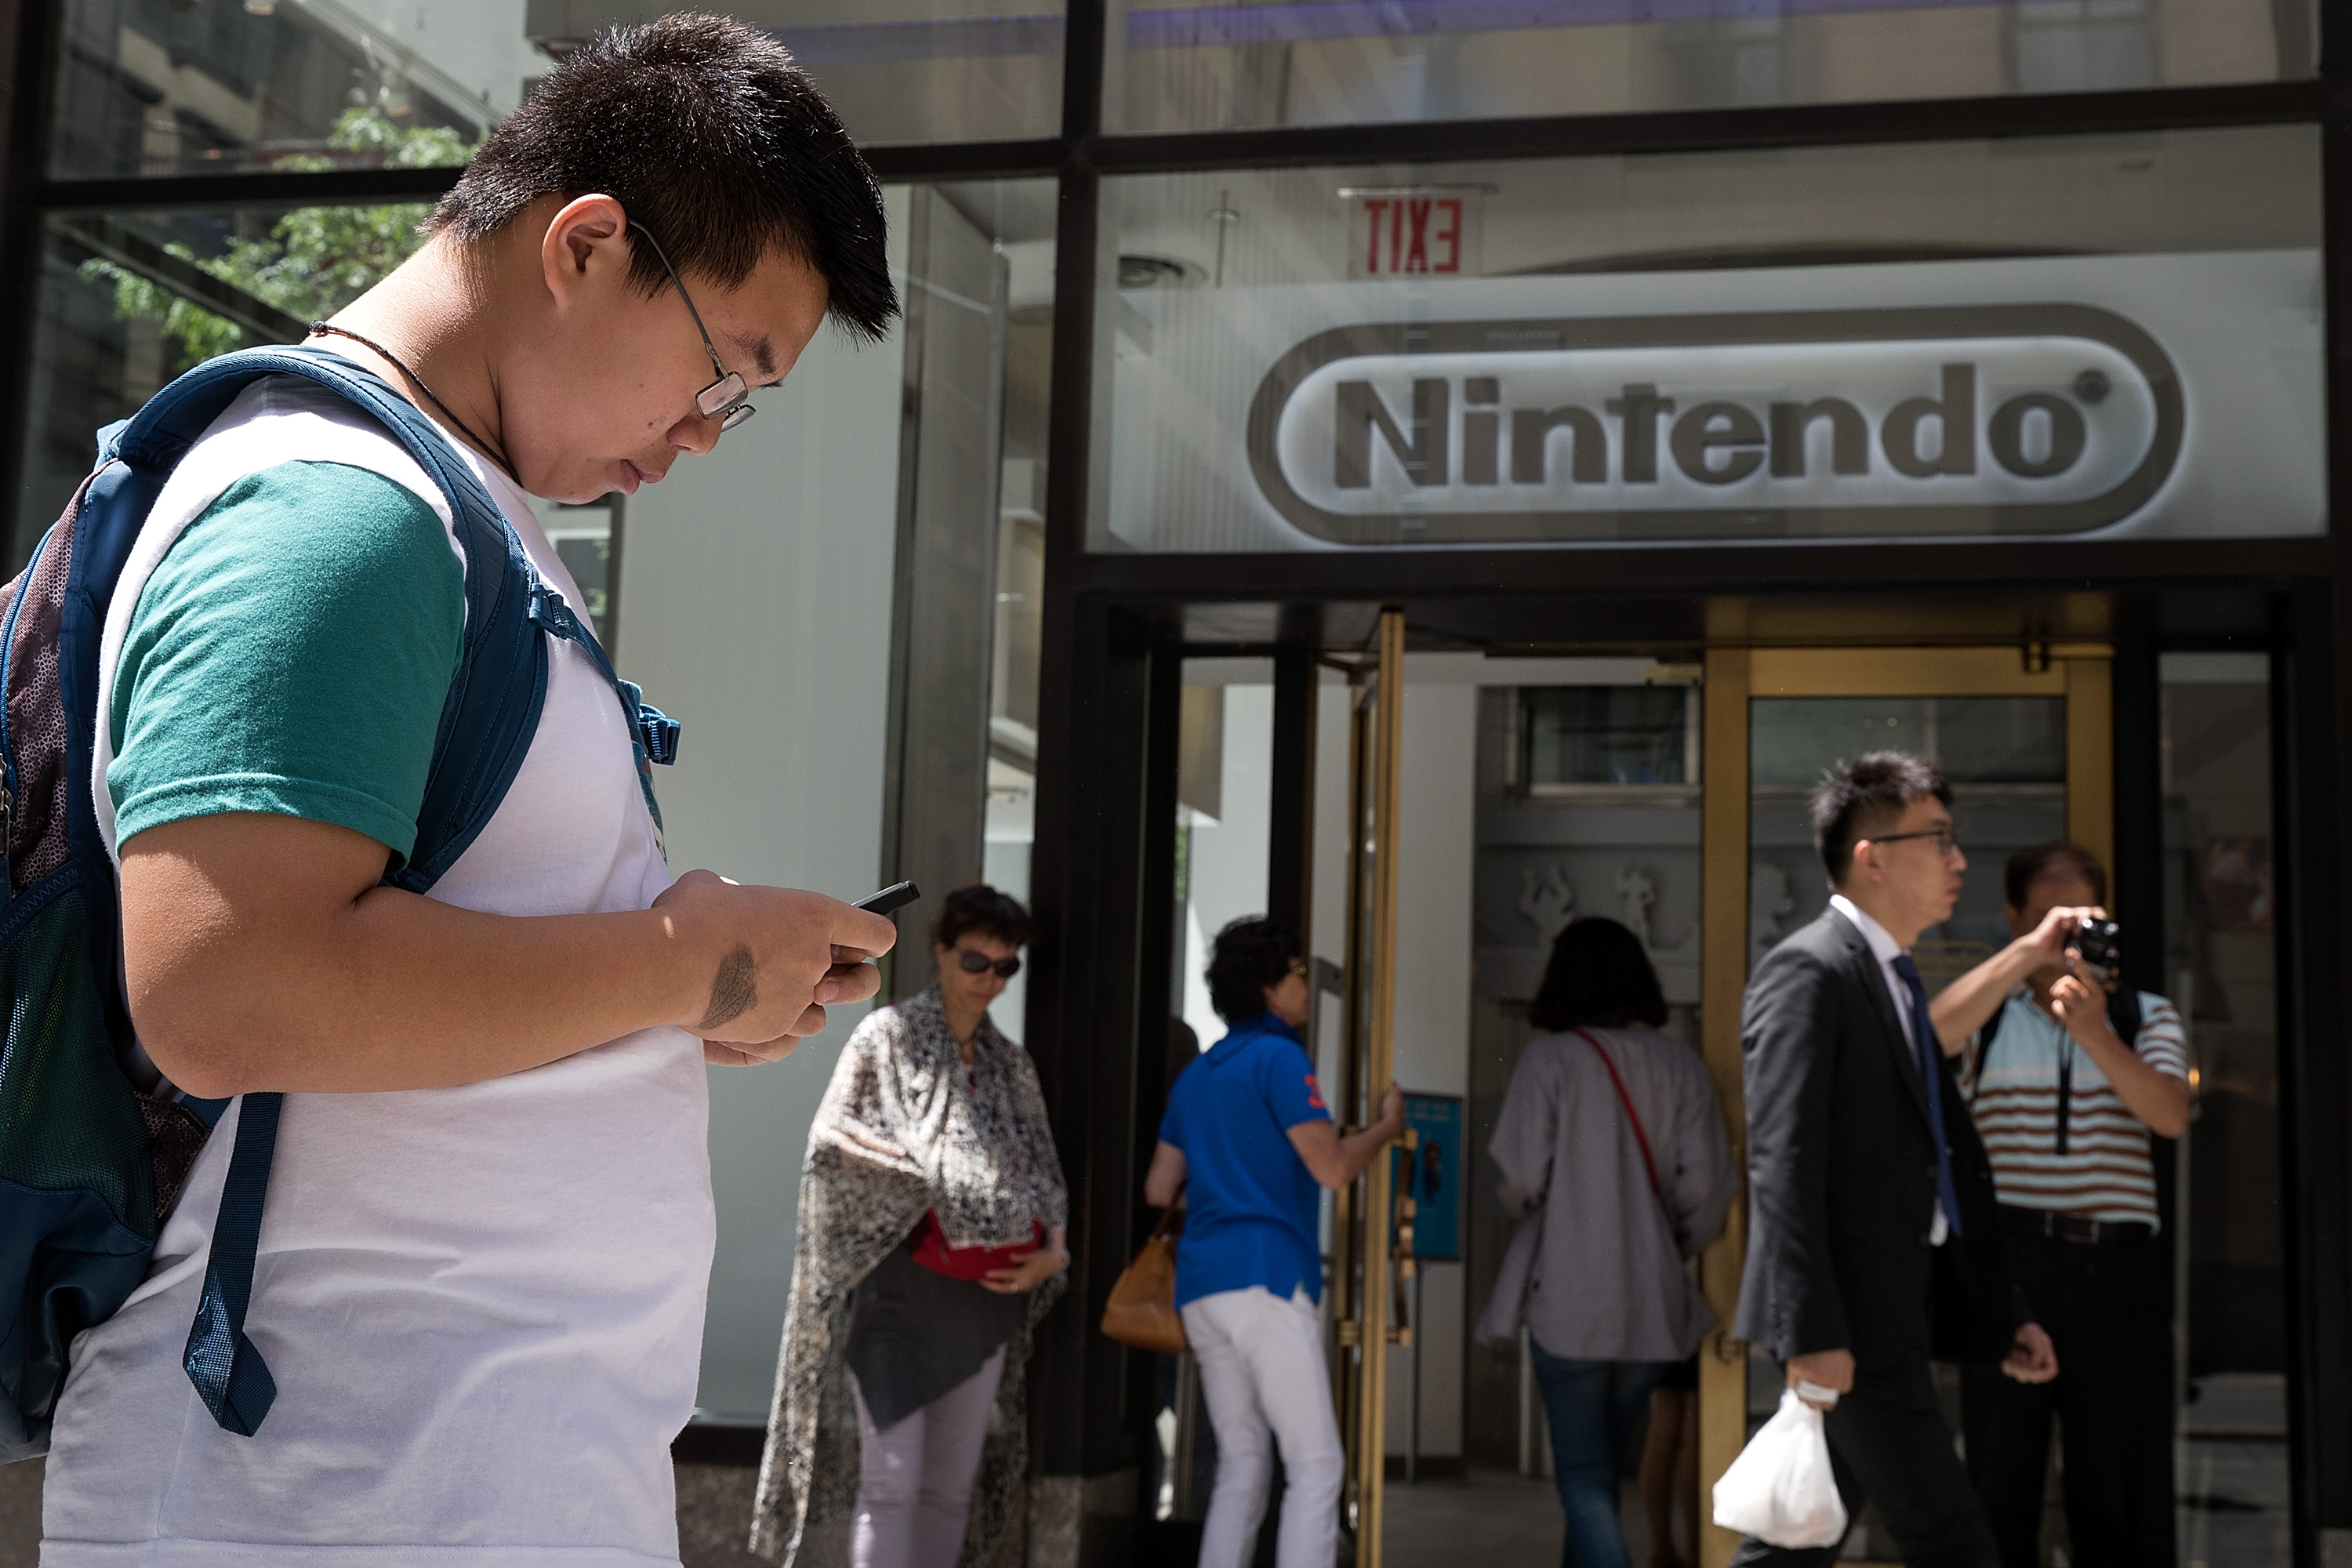 Tim (last name not given) plays Pokemon Go on his smartphone outside of Nintendo's flagship store, July 11, 2016, in New York City. The success of Nintendo's new smartphone game, Pokemon Go, has sent shares of Nintendo soaring (Drew Angerer—Getty Images)